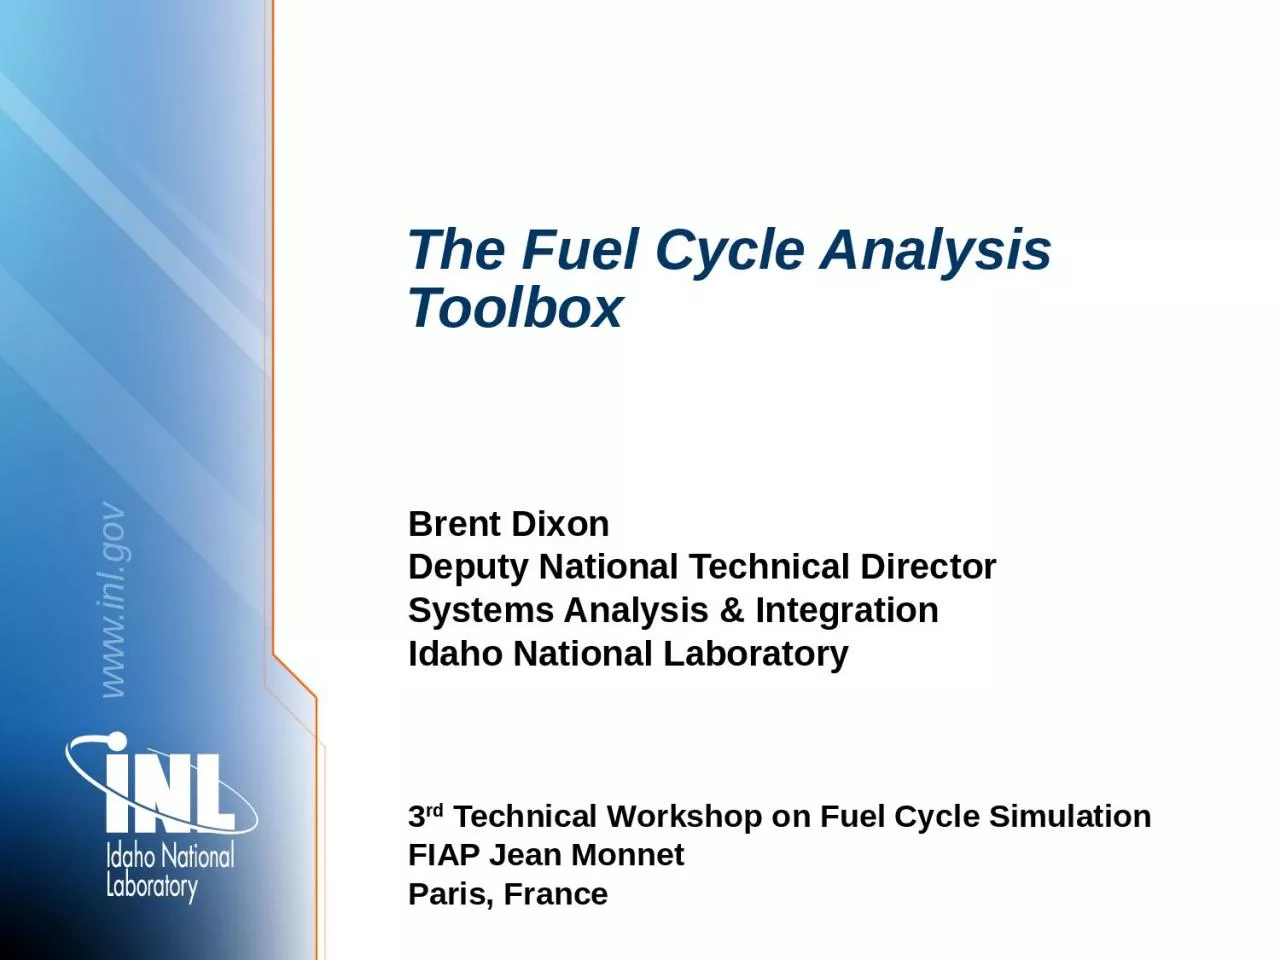 The Fuel Cycle Analysis Toolbox